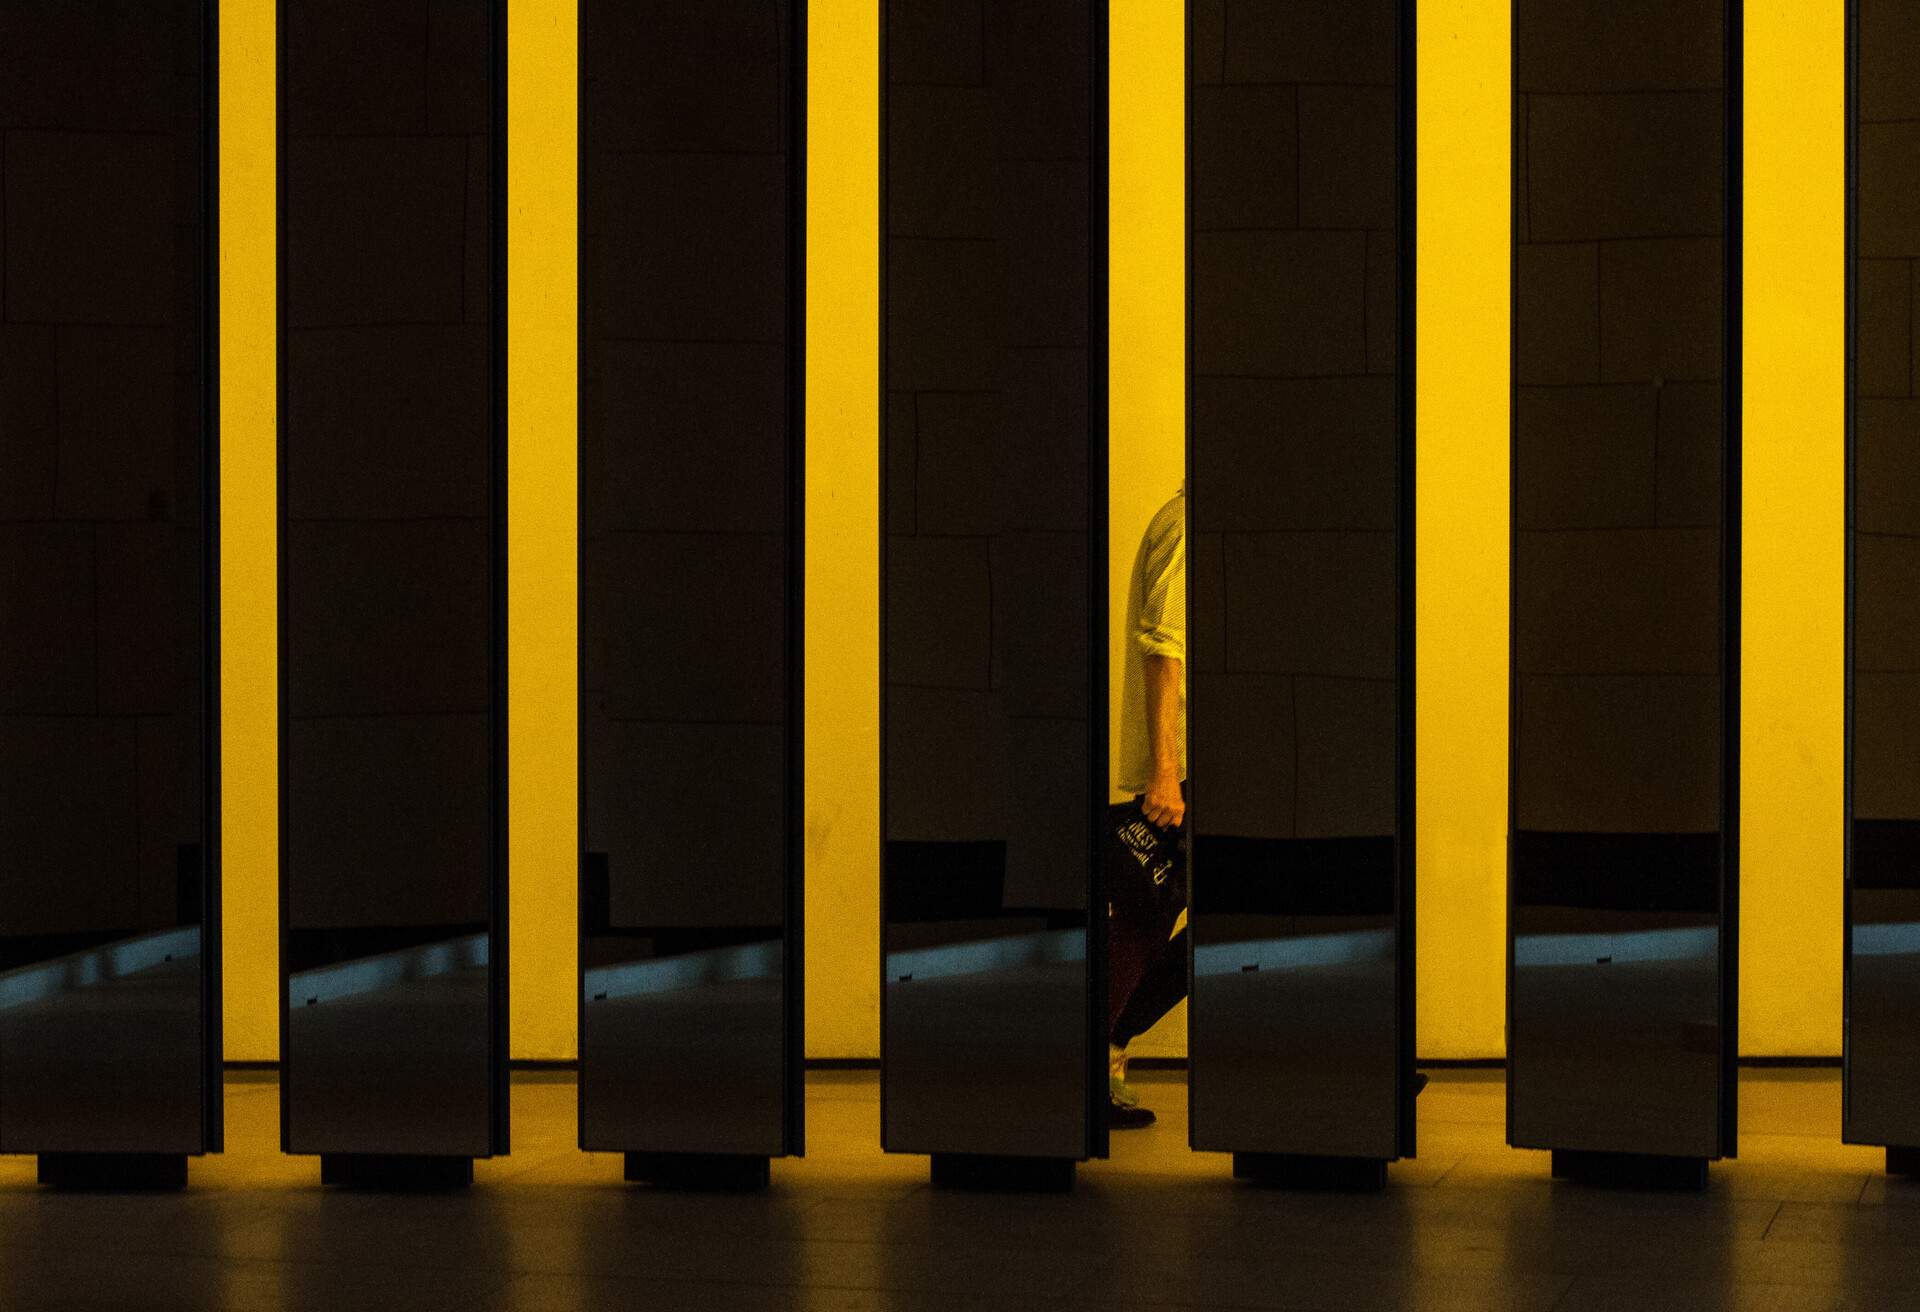 A series of yellow columns, one of which has a reflection of a person's half-body.